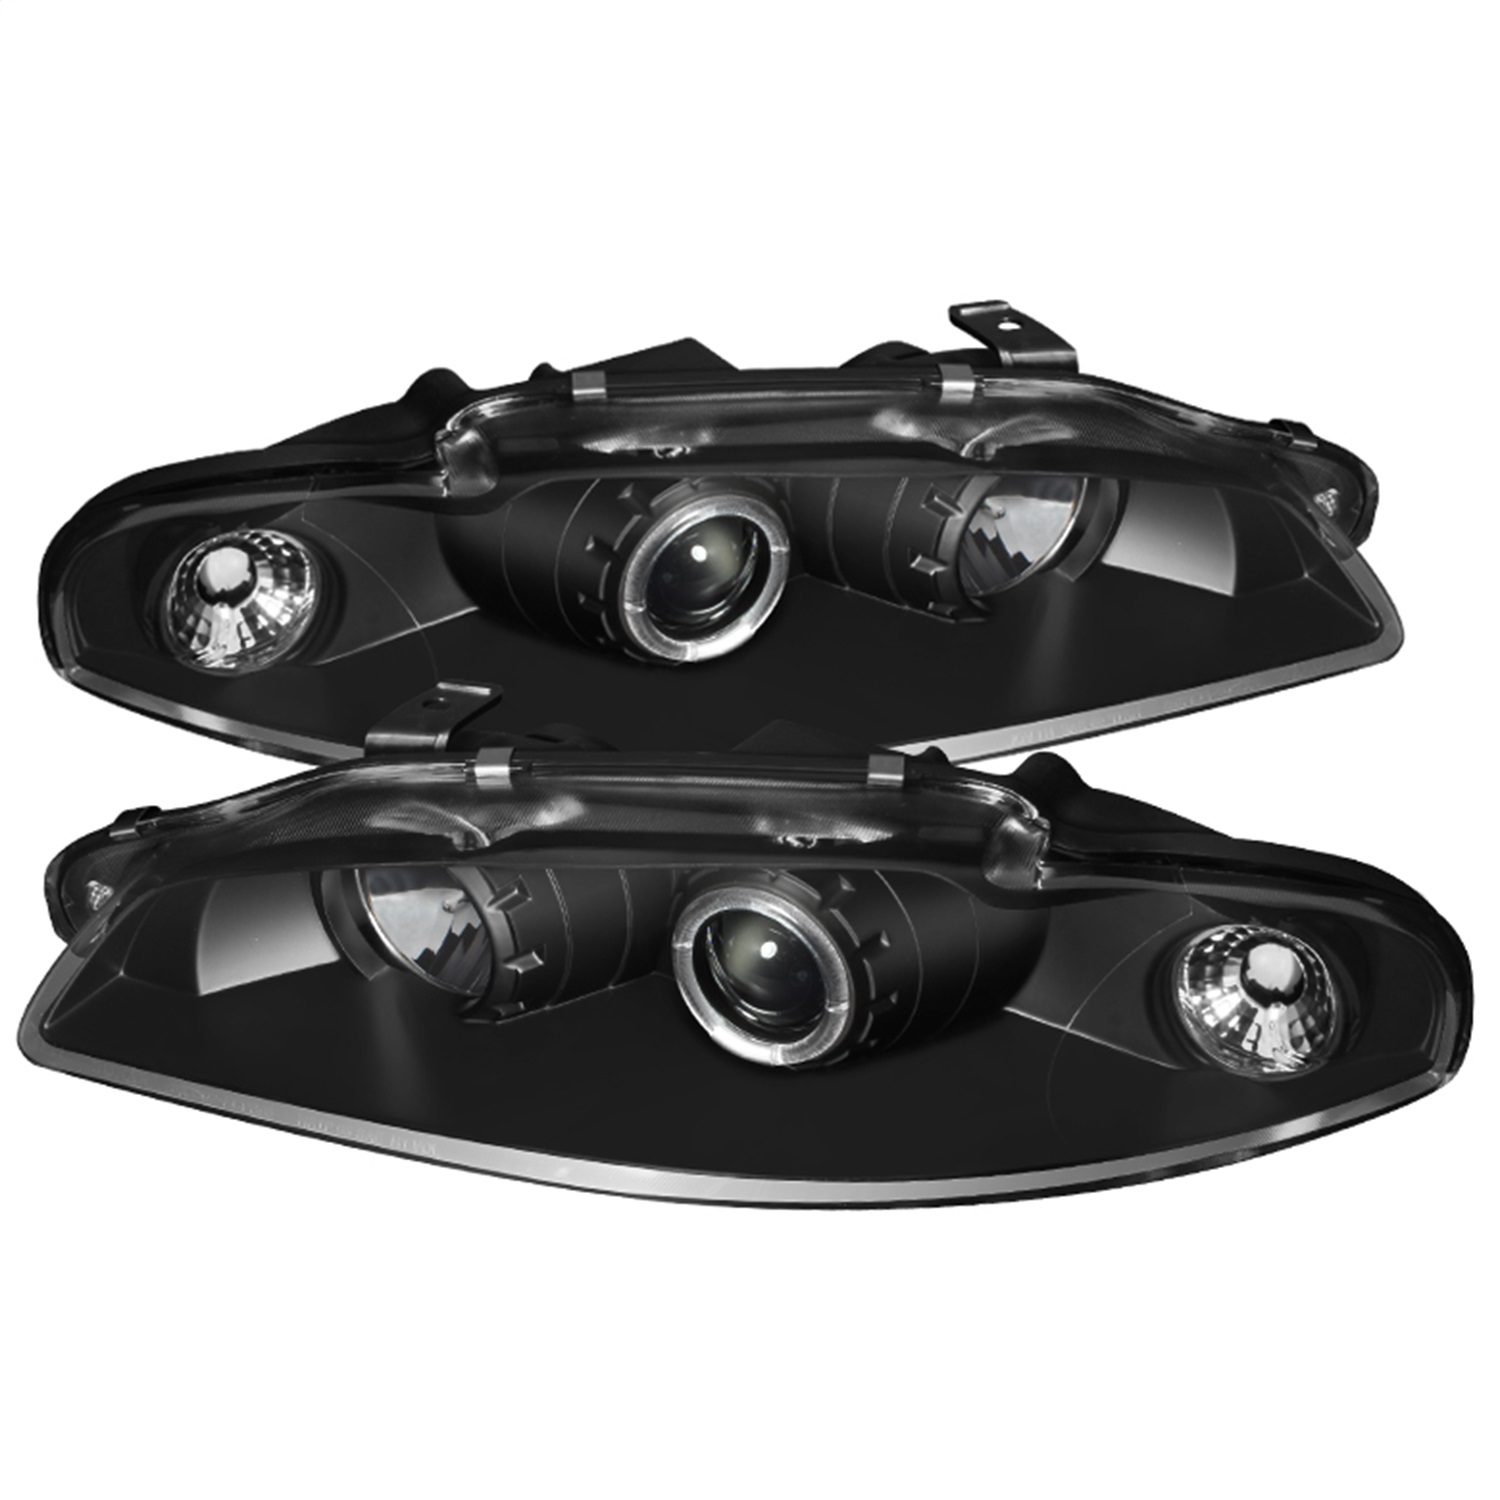 Spyder Auto 5011473 Halo Projector Headlights Fits 97-99 Eclipse